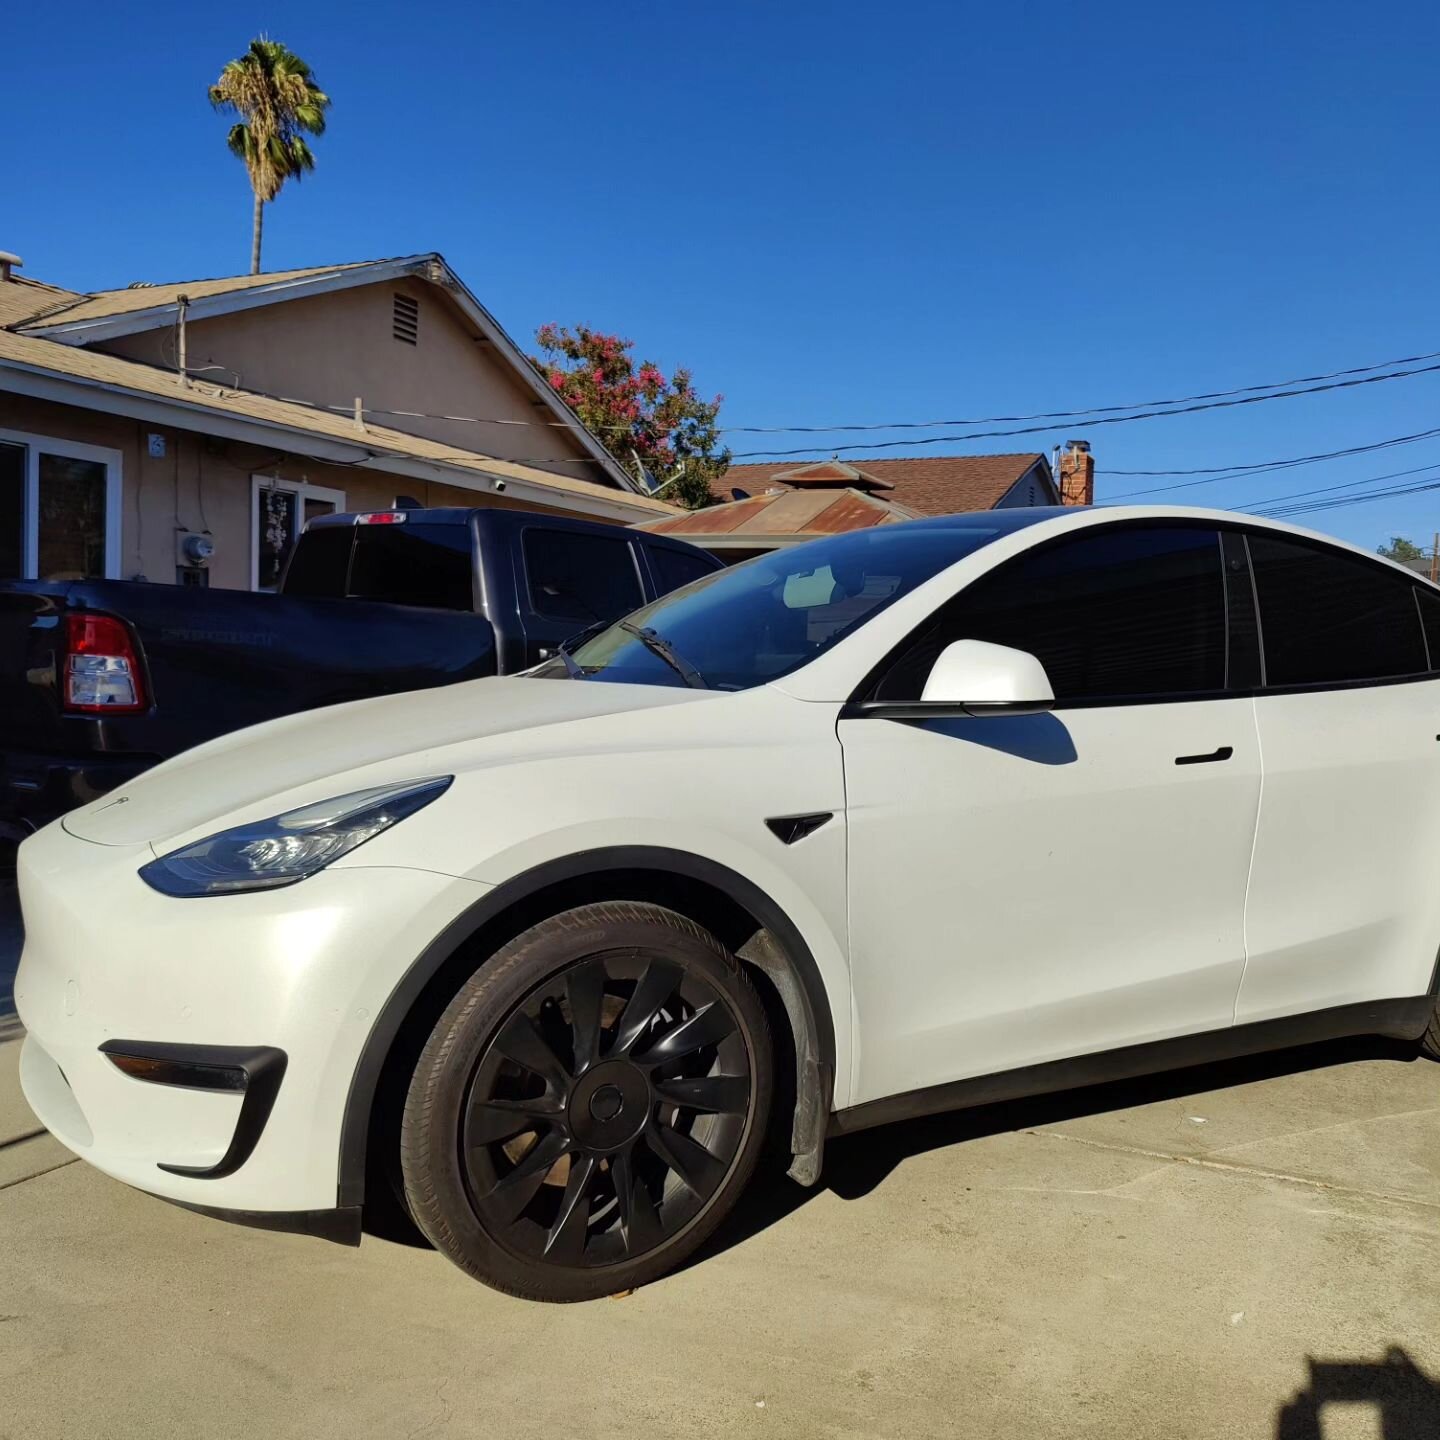 Basic Carwash on a Model Y Tesla, another satisfied customer who needed a carwash done on their vehicle after a trip. We all know vehicles get dirty after a vacation, so make sure you schedule to get your appointment for your next wash.
.
.
.
.
.
.
.